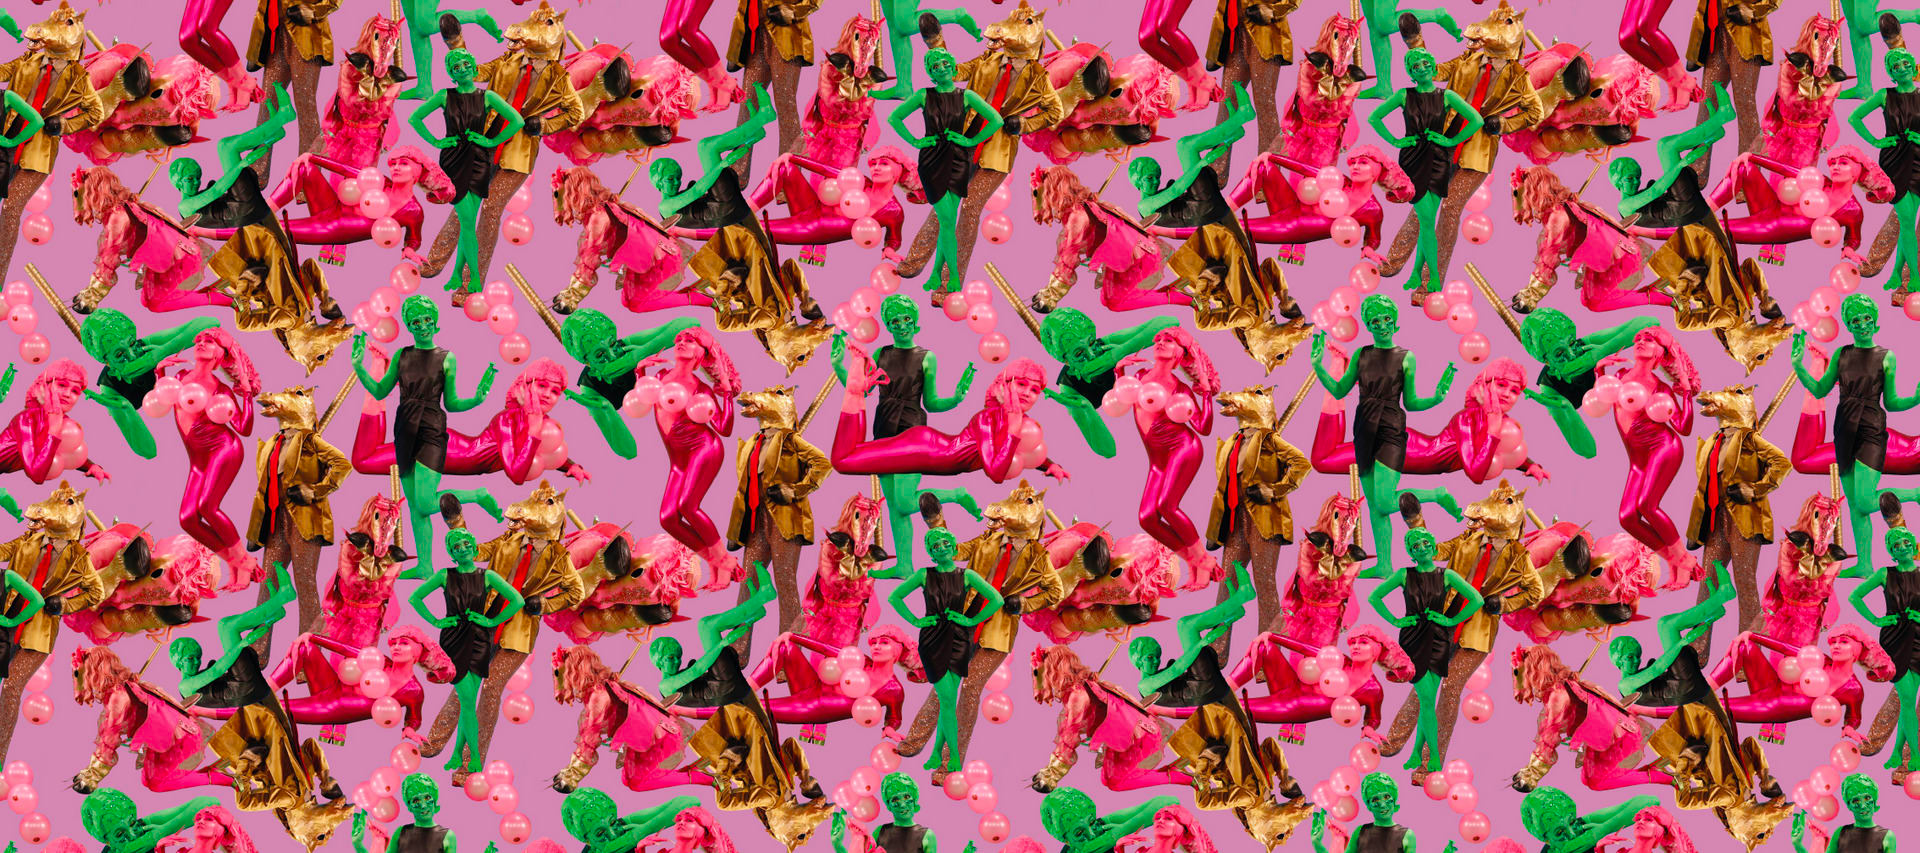 Image of lots of tiny photographs of figures in pink, green and gold, in a repeat pattern, over a pink background.